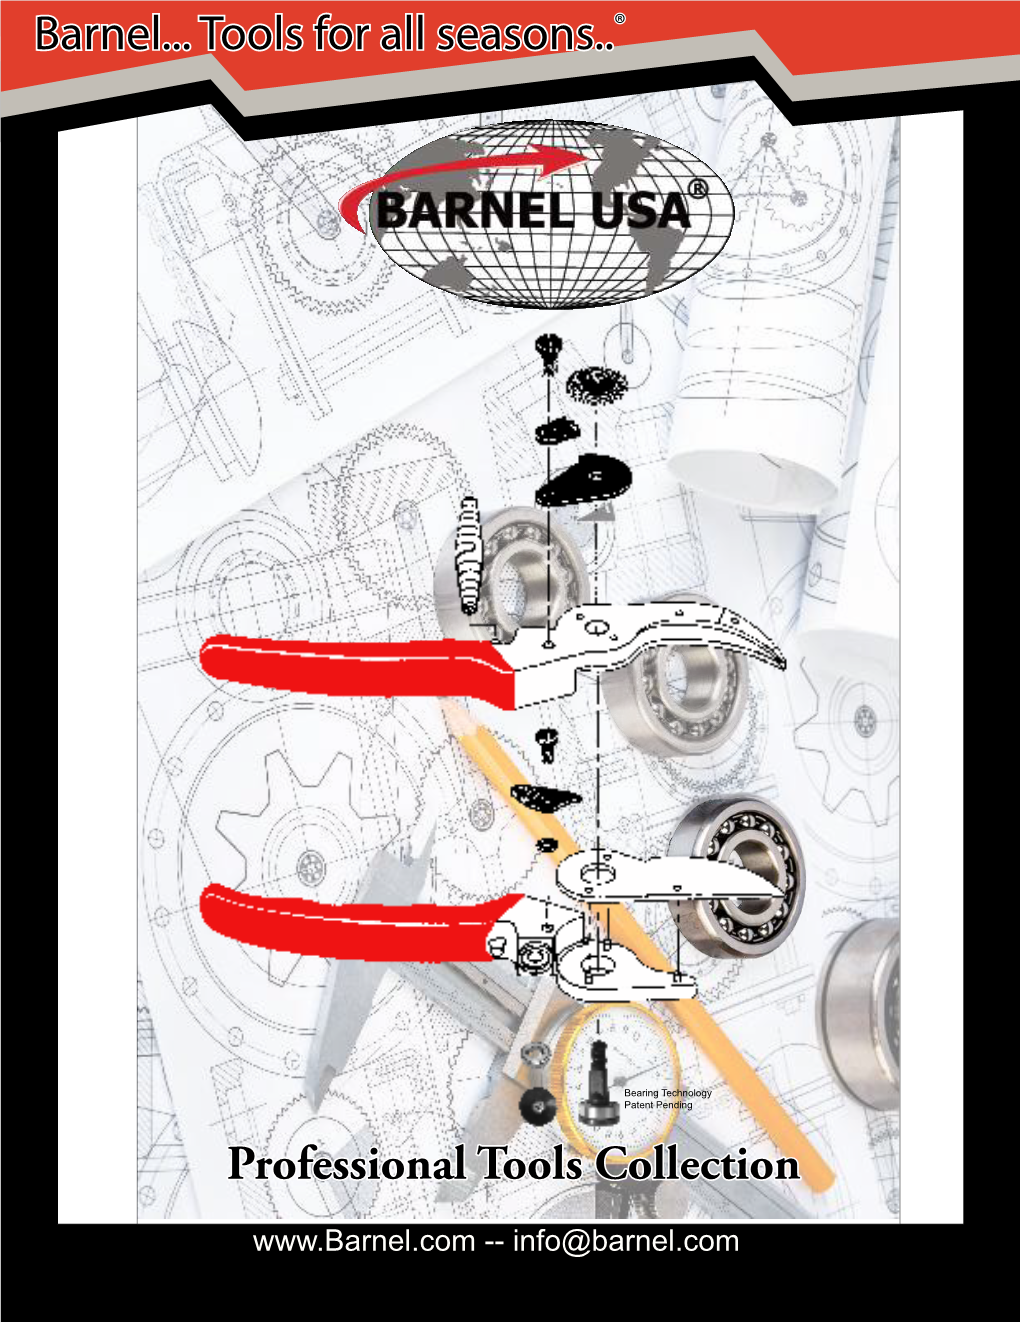 Professional Tools Collection Barnel... Tools for All Seasons..®